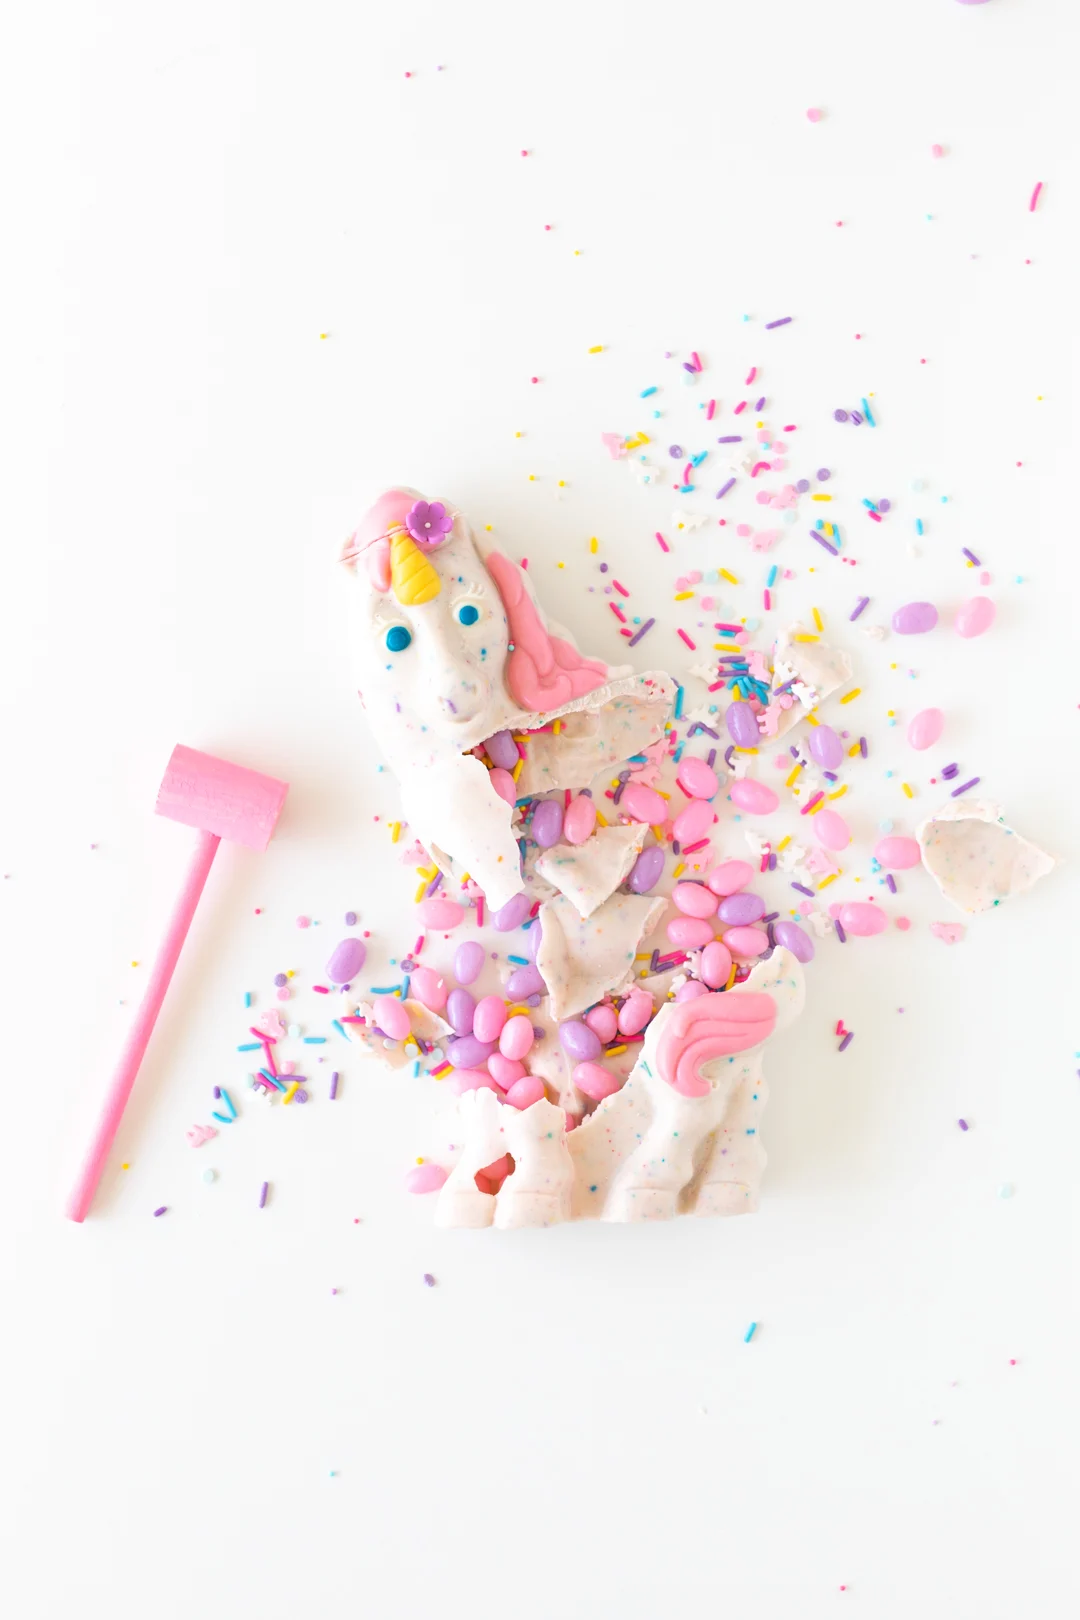 Smash unicorn with sprinkles and pastel jelly beans using a painted pink mini mallet